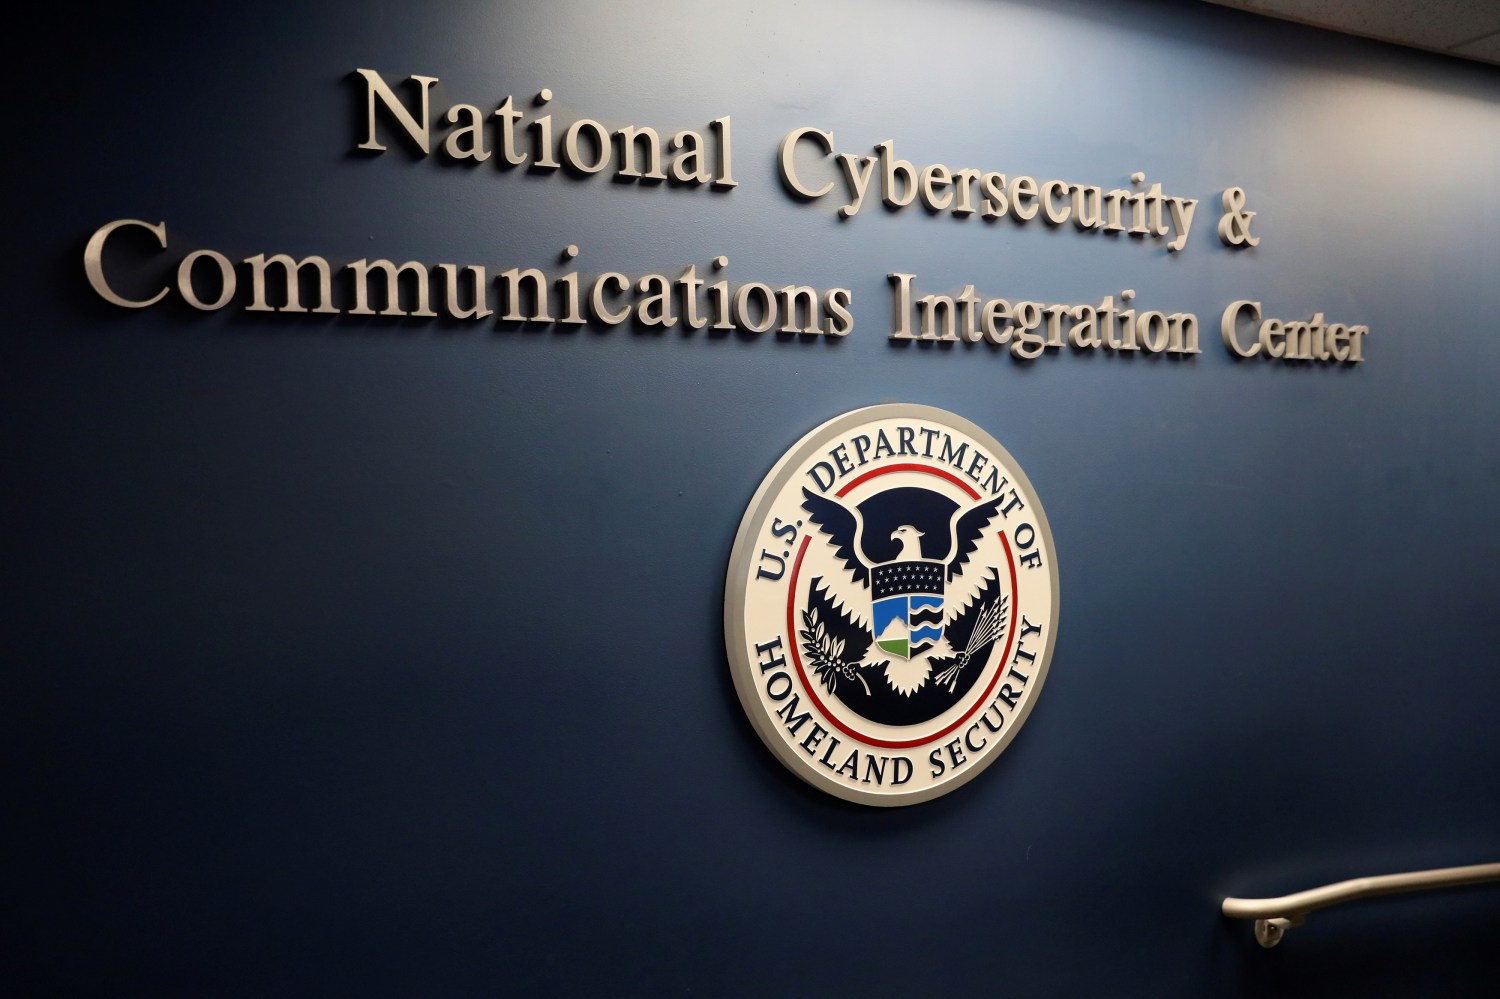 The U.S. Department of Homeland Security National Cybersecurity and Communications Integration Center (NCCIC) in Arlington, Virginia, U.S. November 6, 2018. REUTERS/Jonathan Ernst - RC1FA07A2FE0